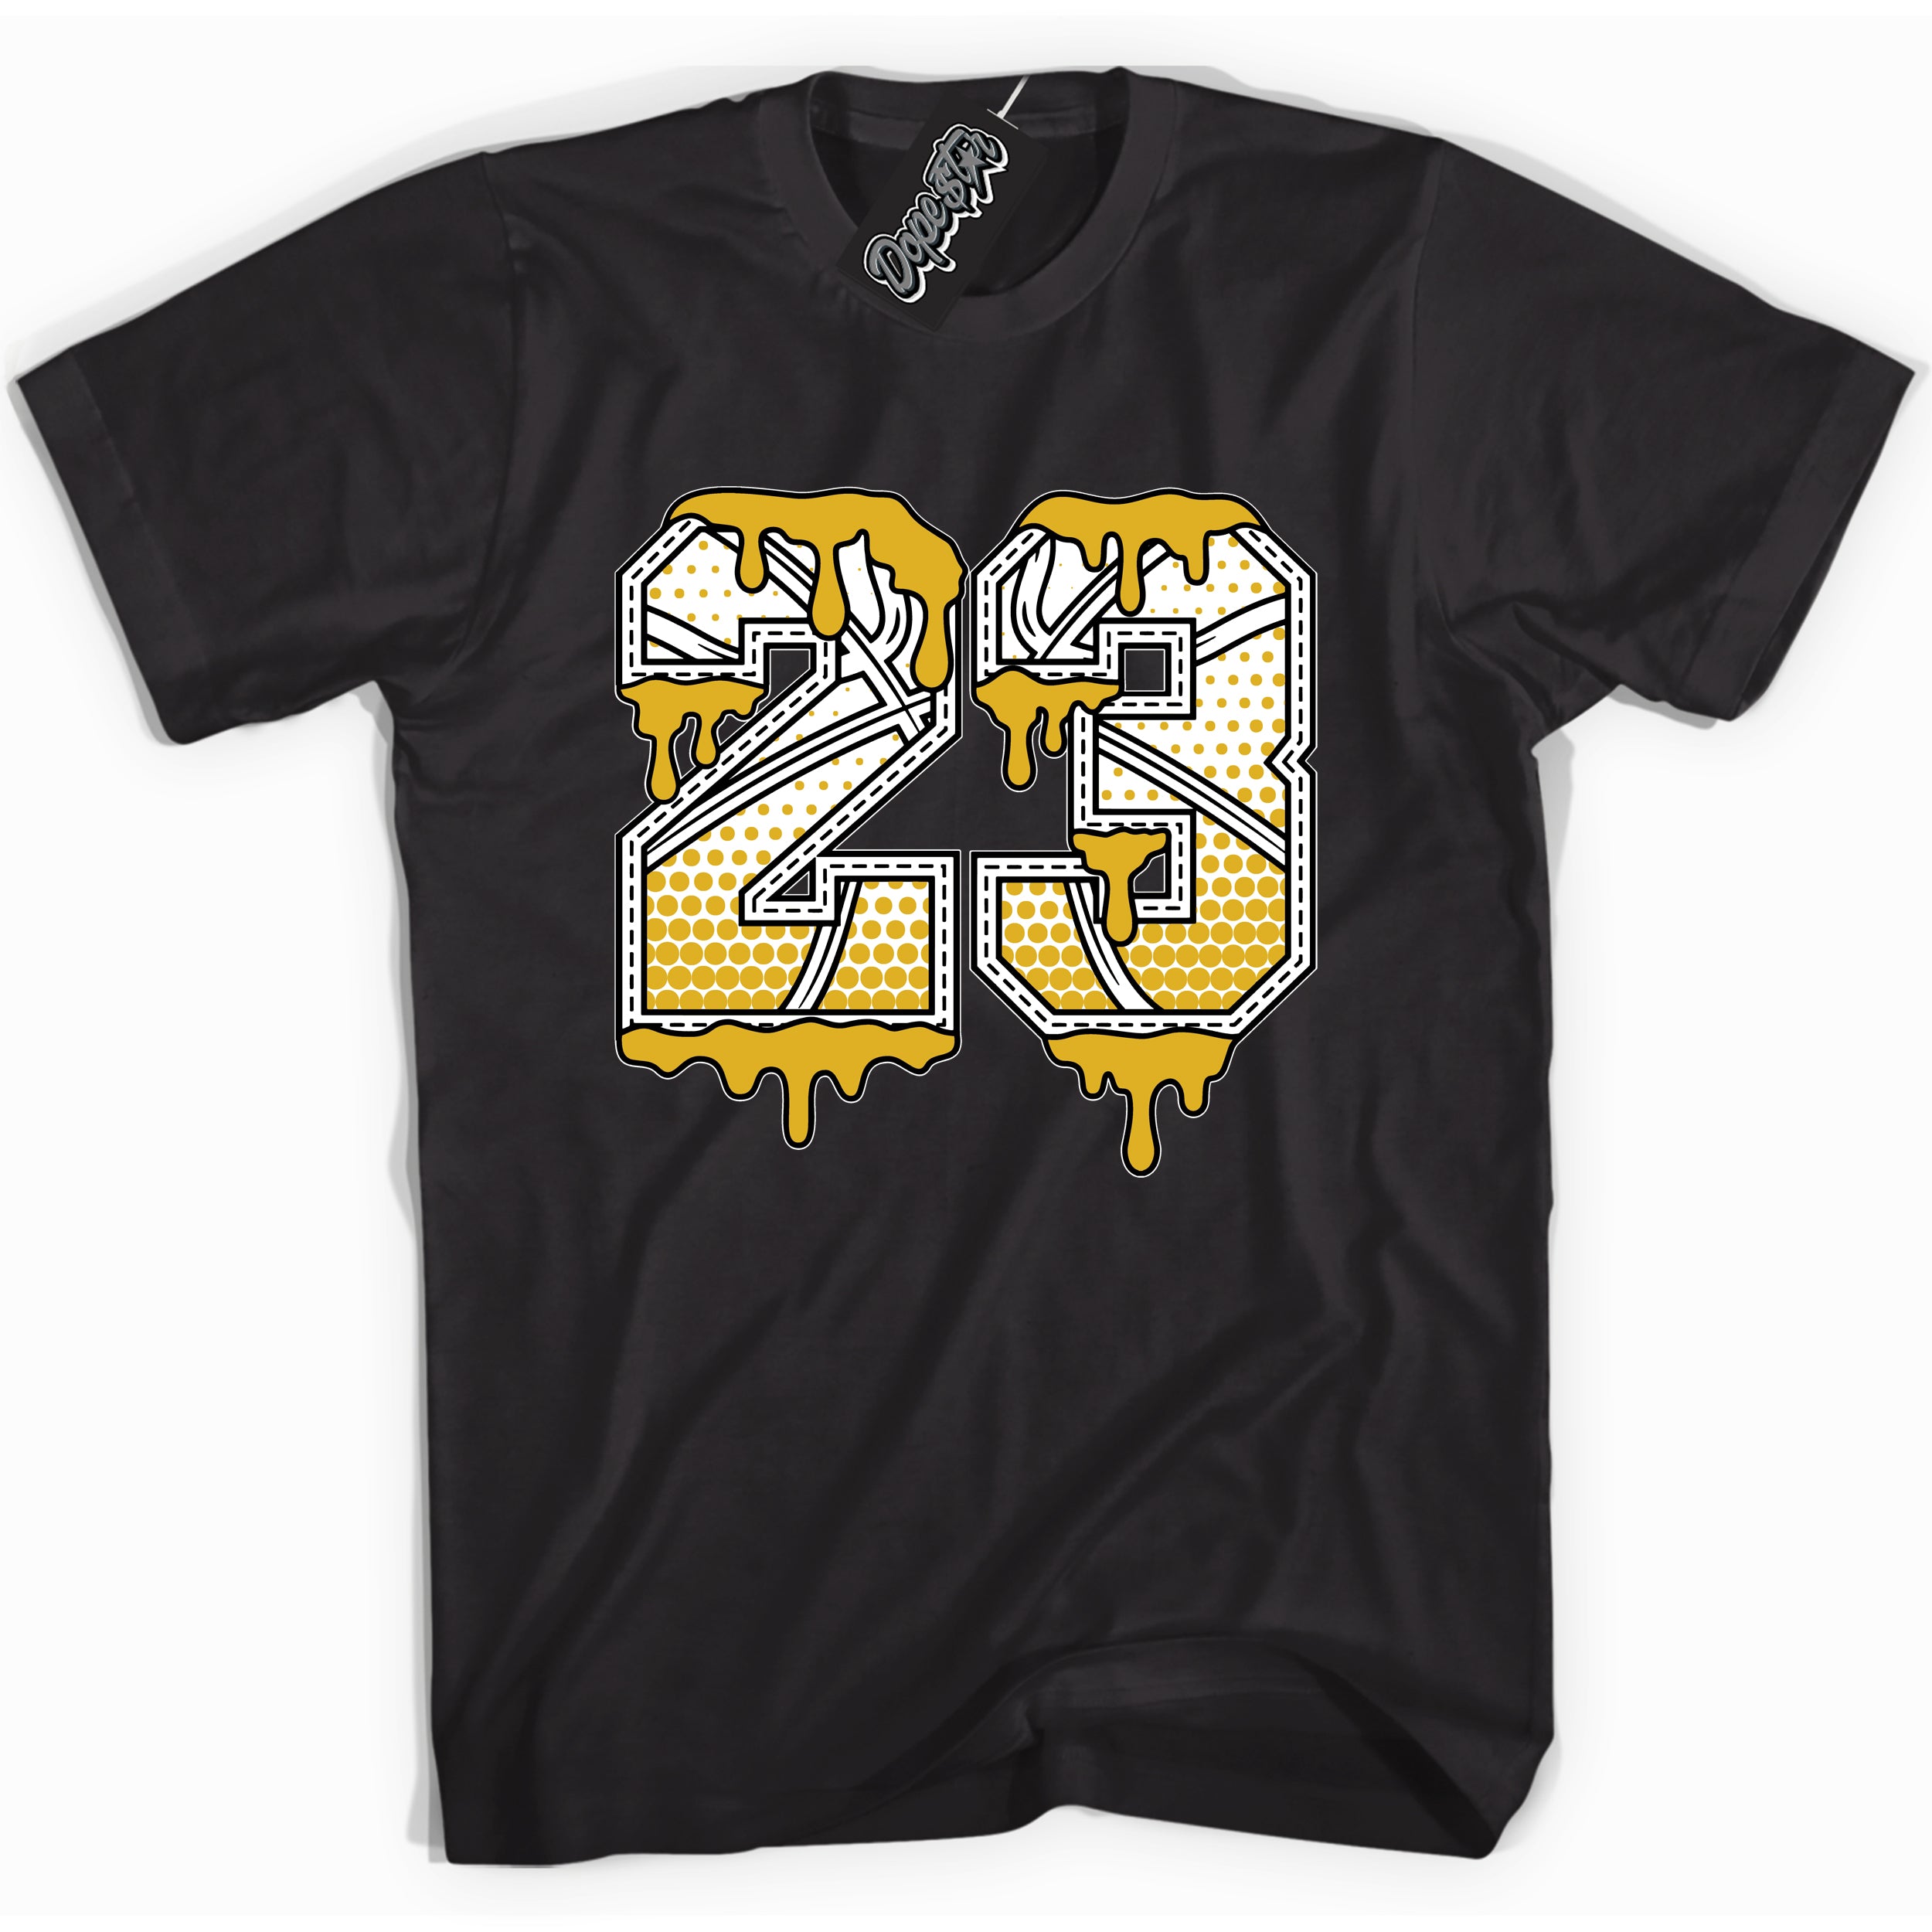 Cool Black Shirt with “ 23 Ball” design that perfectly matches Yellow Ochre 6s Sneakers.